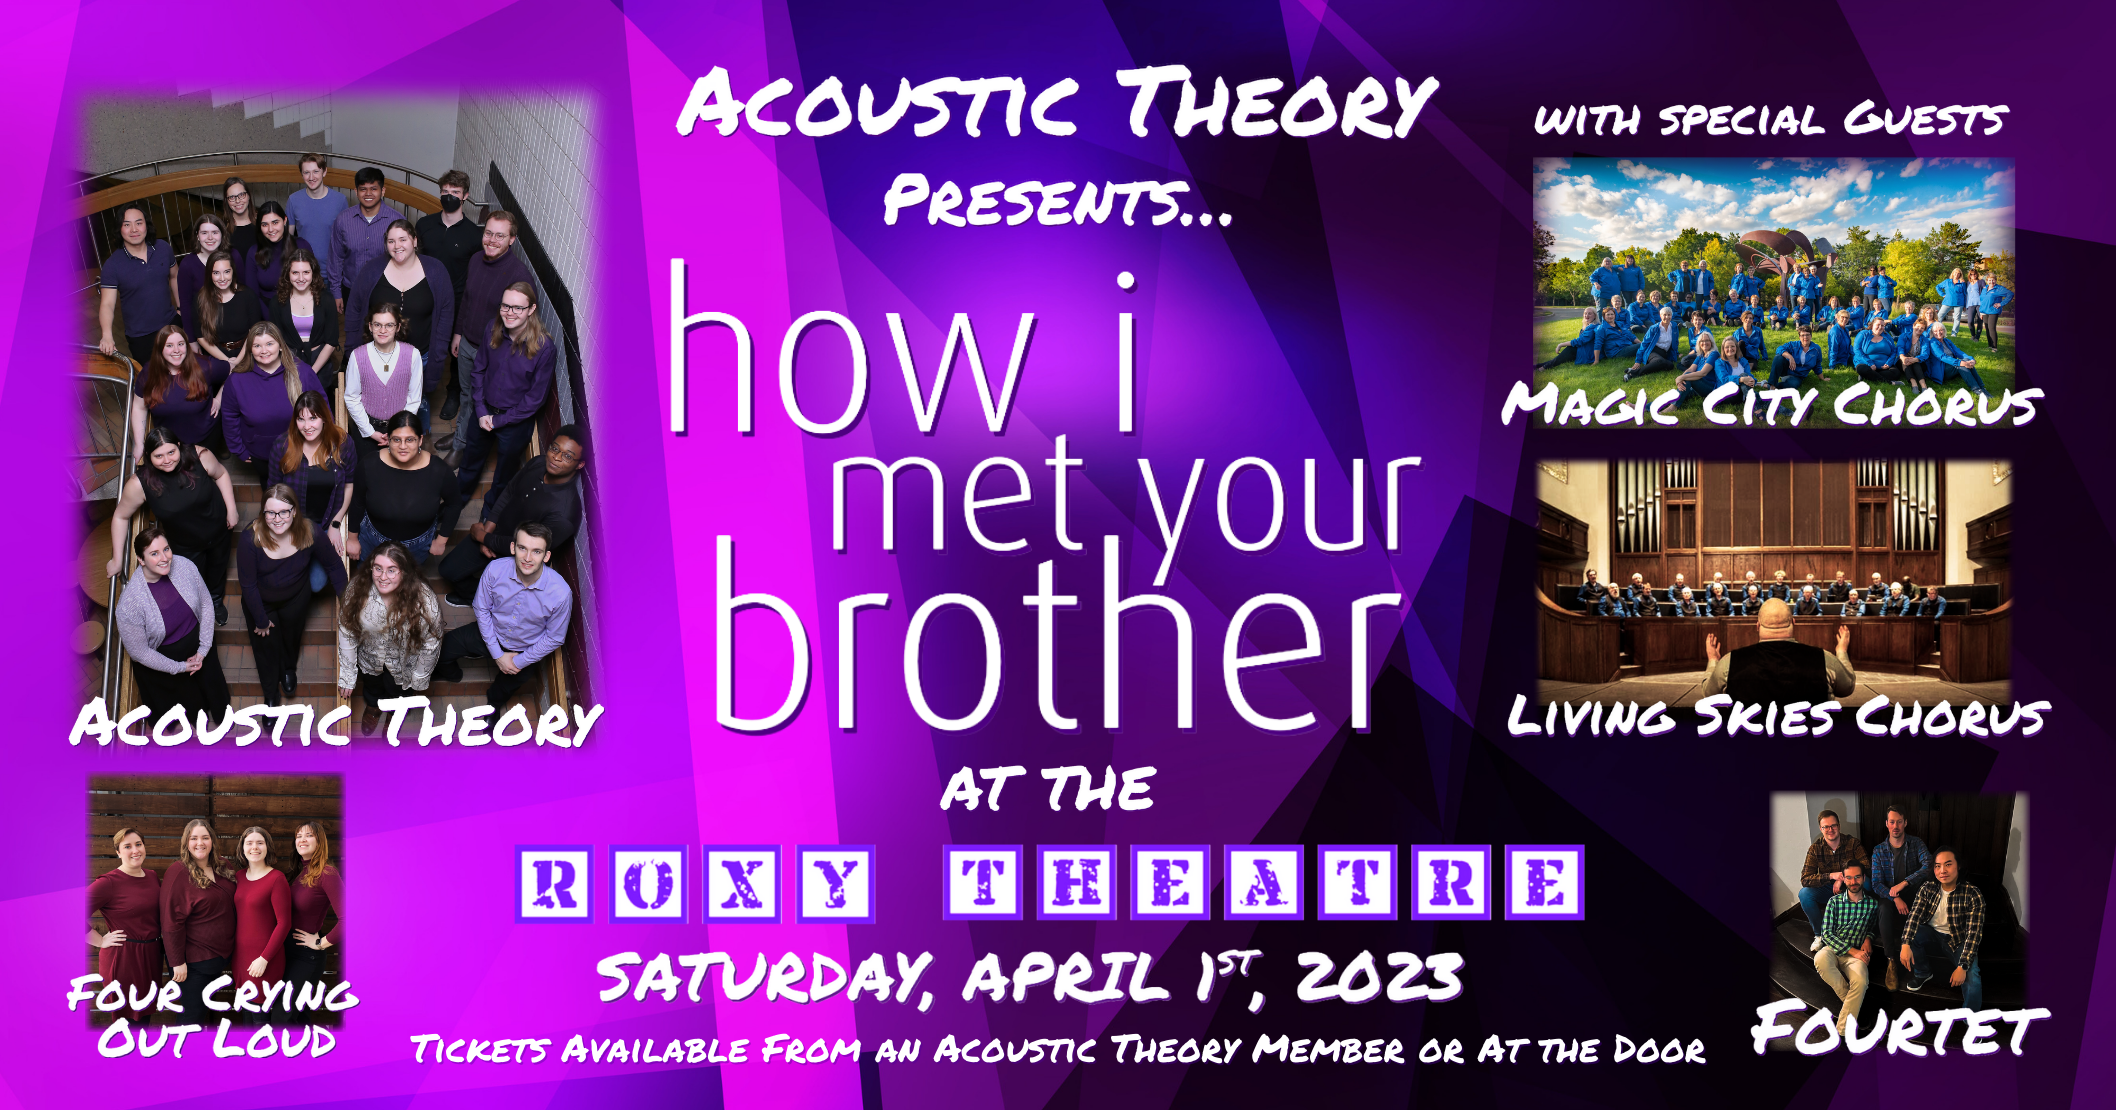 How I Met Your Brother: An A Acappella Showcase